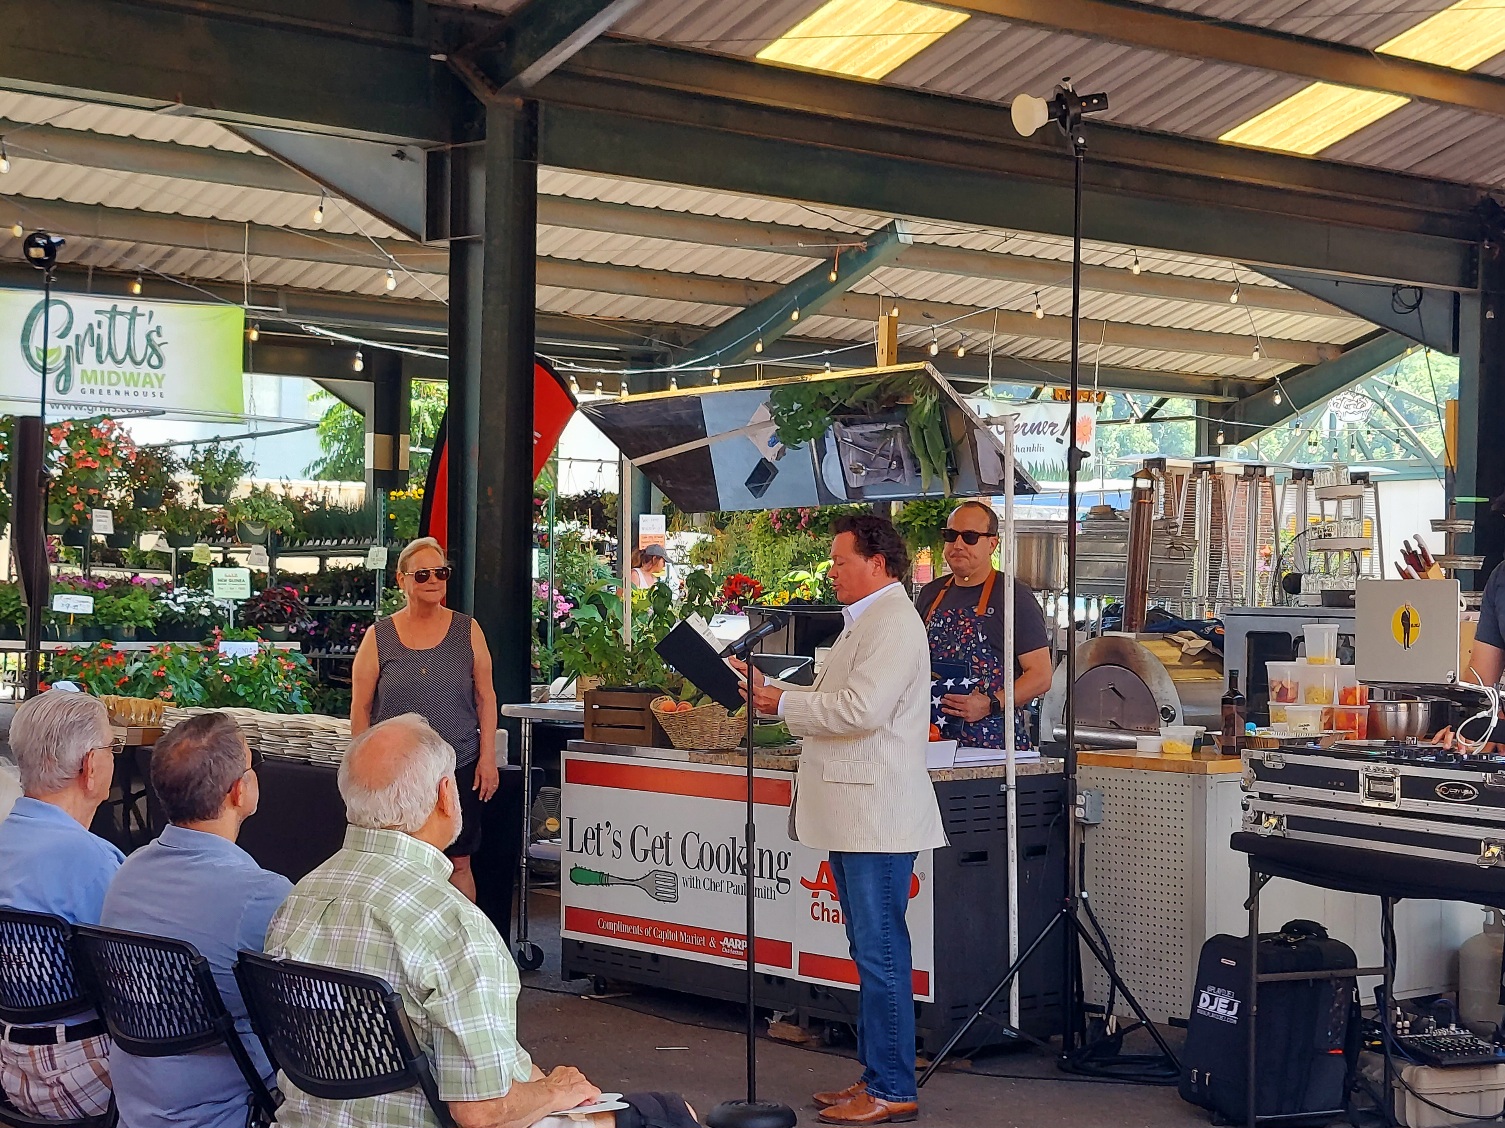 Chef Paul Smith attracts large crowd in for monthly cooking demo at Capitol Market following major award win - West Virginia MetroNews